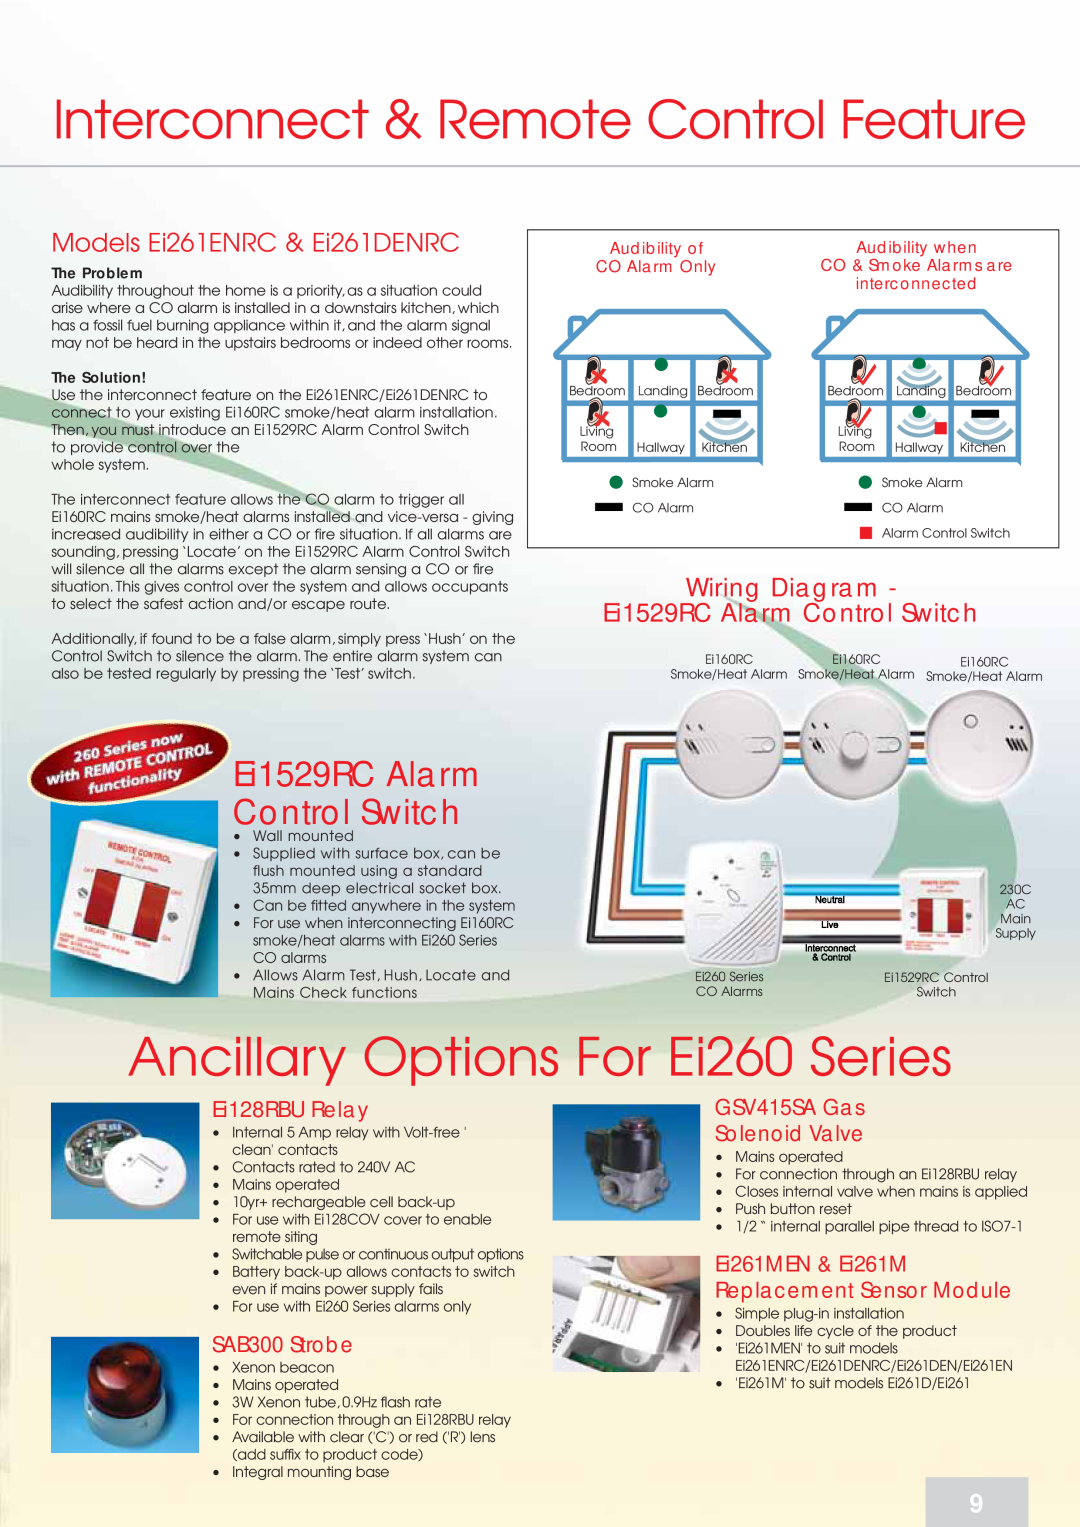 Aico manual Interconnect & Remote Control Feature, Ancillary Options For Ei260 Series, Ei1529RC Alarm Control Switch 